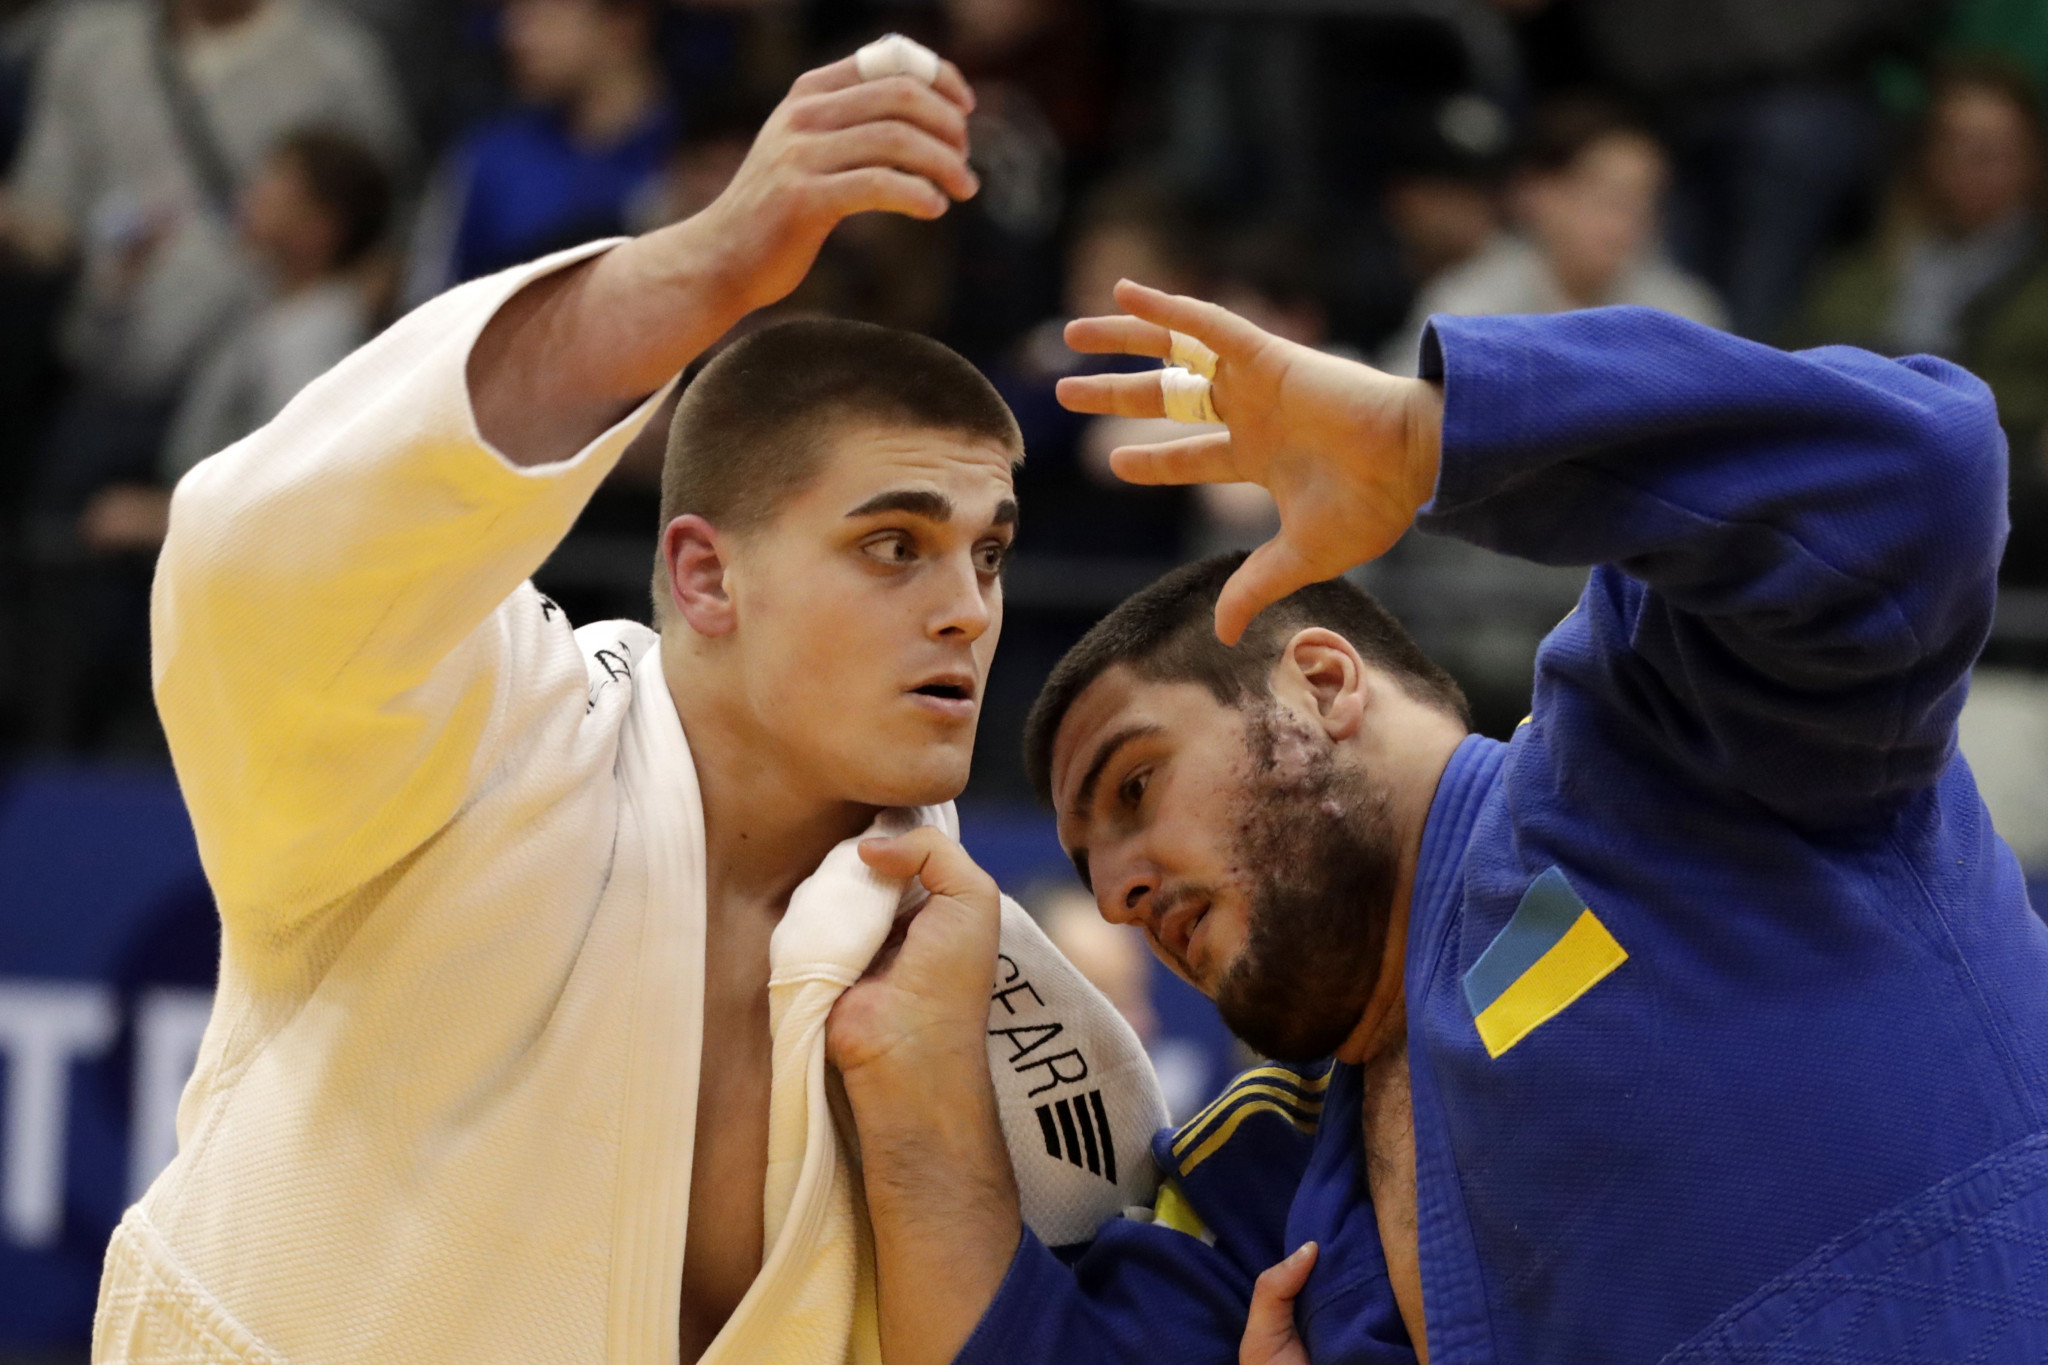 The Ukrainian Judo Federation is expected to issue a statement on its decision to boycott the tournament tomorrow ©Getty Images